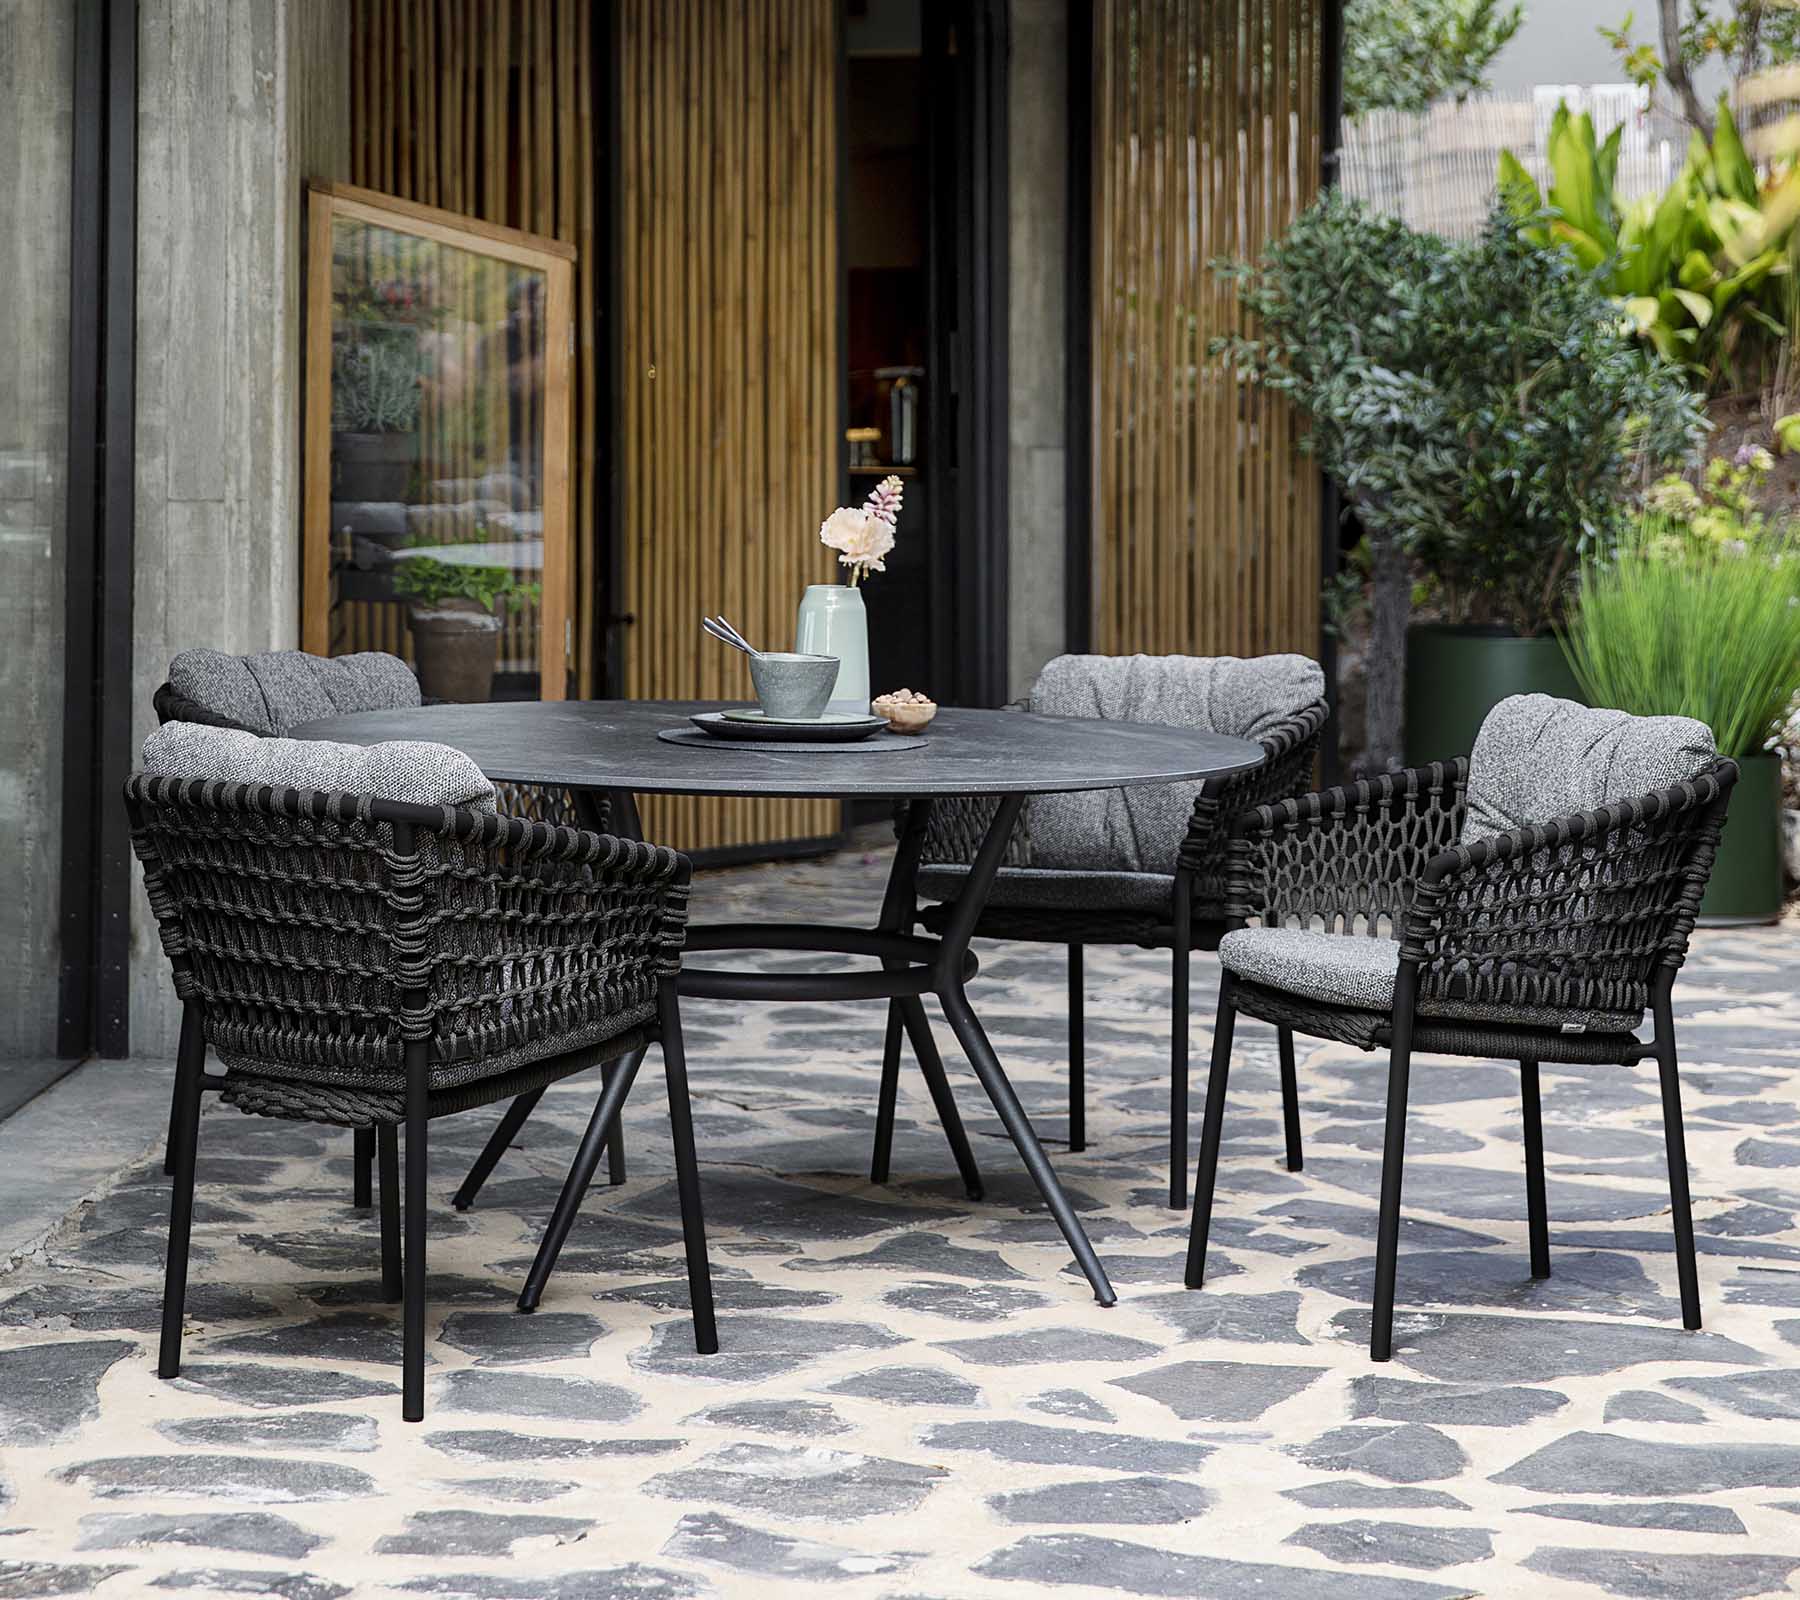 Boxhill's Joy Round Outdoor Dining Table Lifestyle image with 4 dining chairs at patio